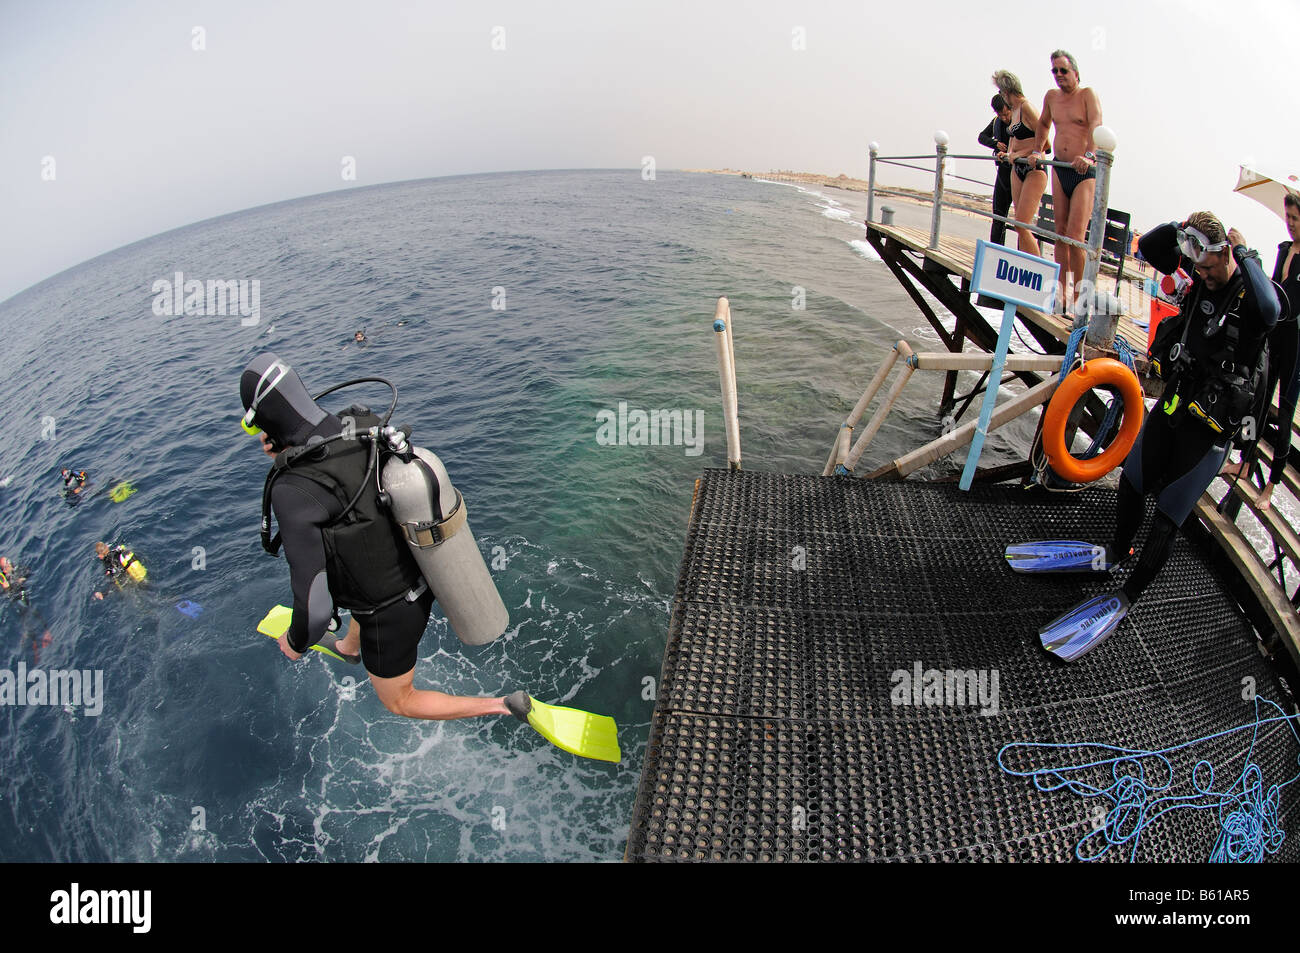 scuba diver jumping into water from jetty Stock Photo - Alamy